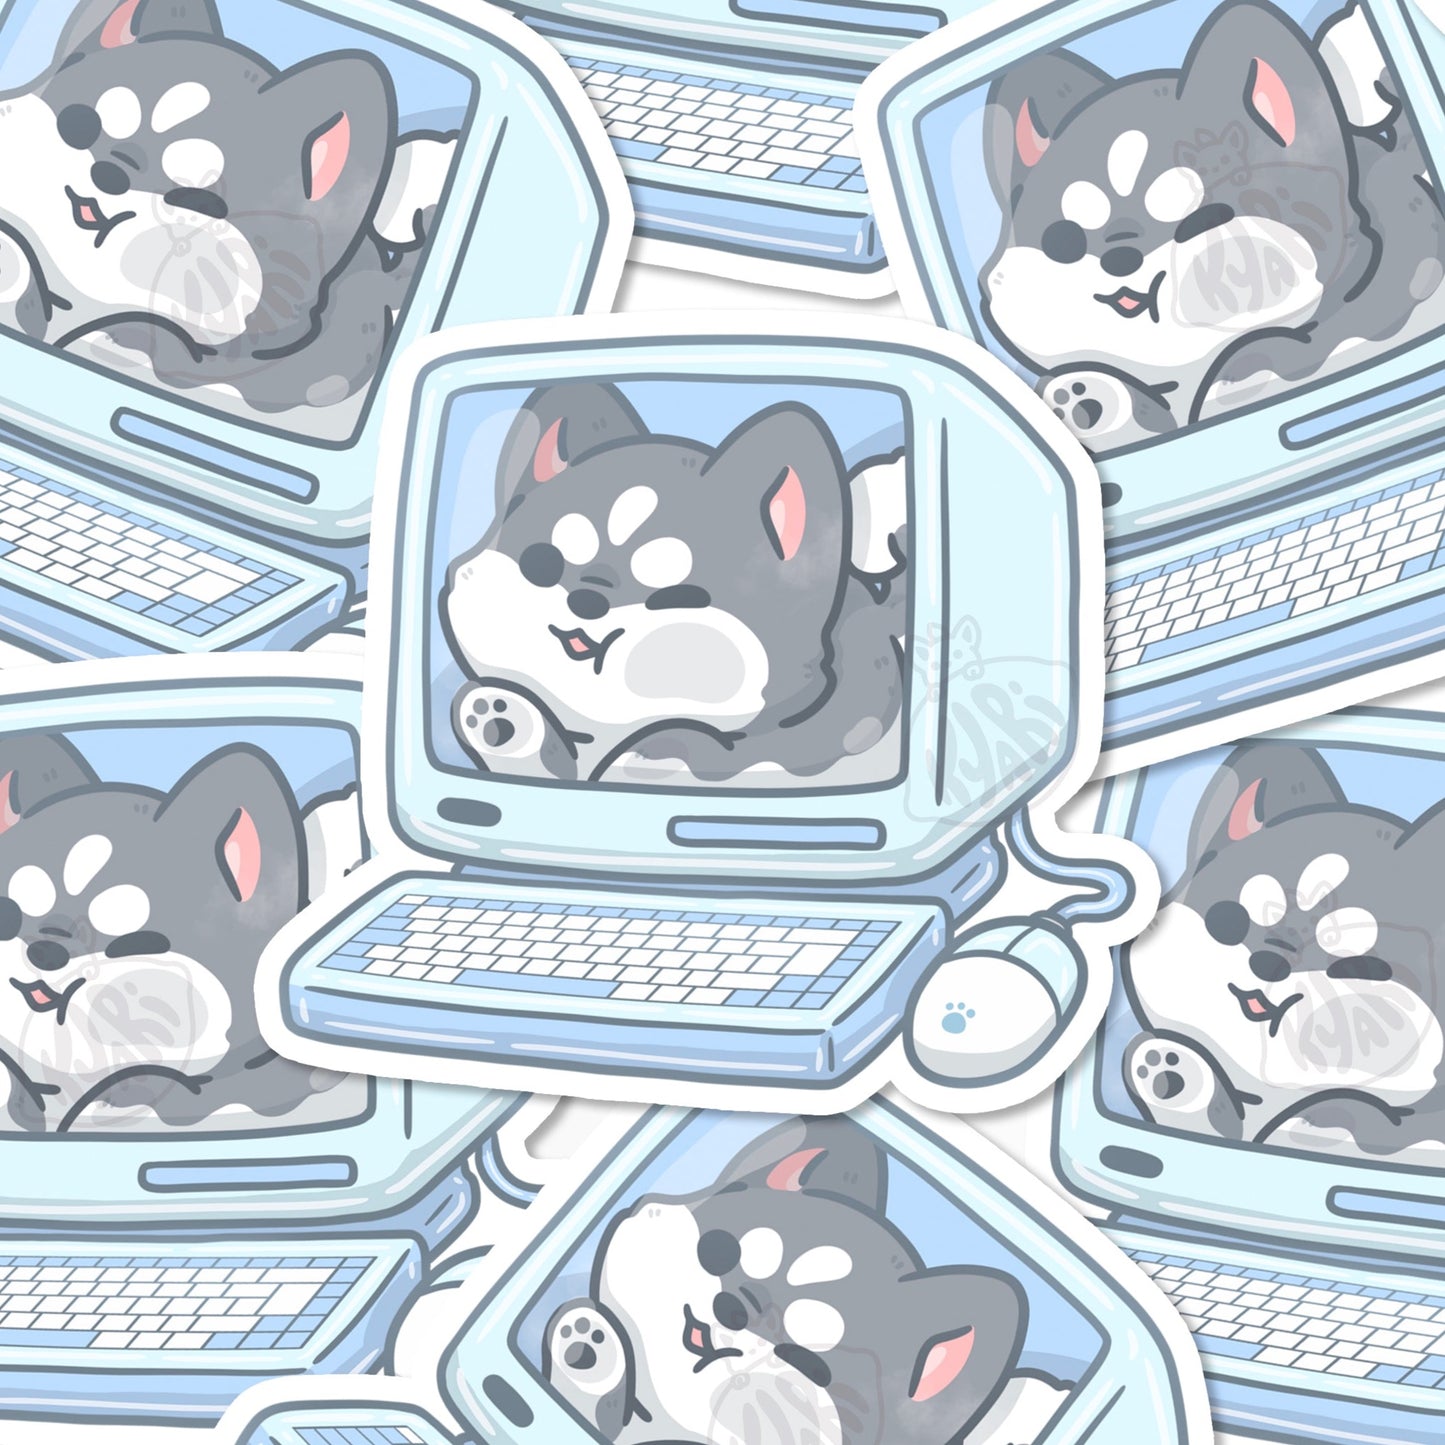 Husky In A Computer Stickers - KyariKreations